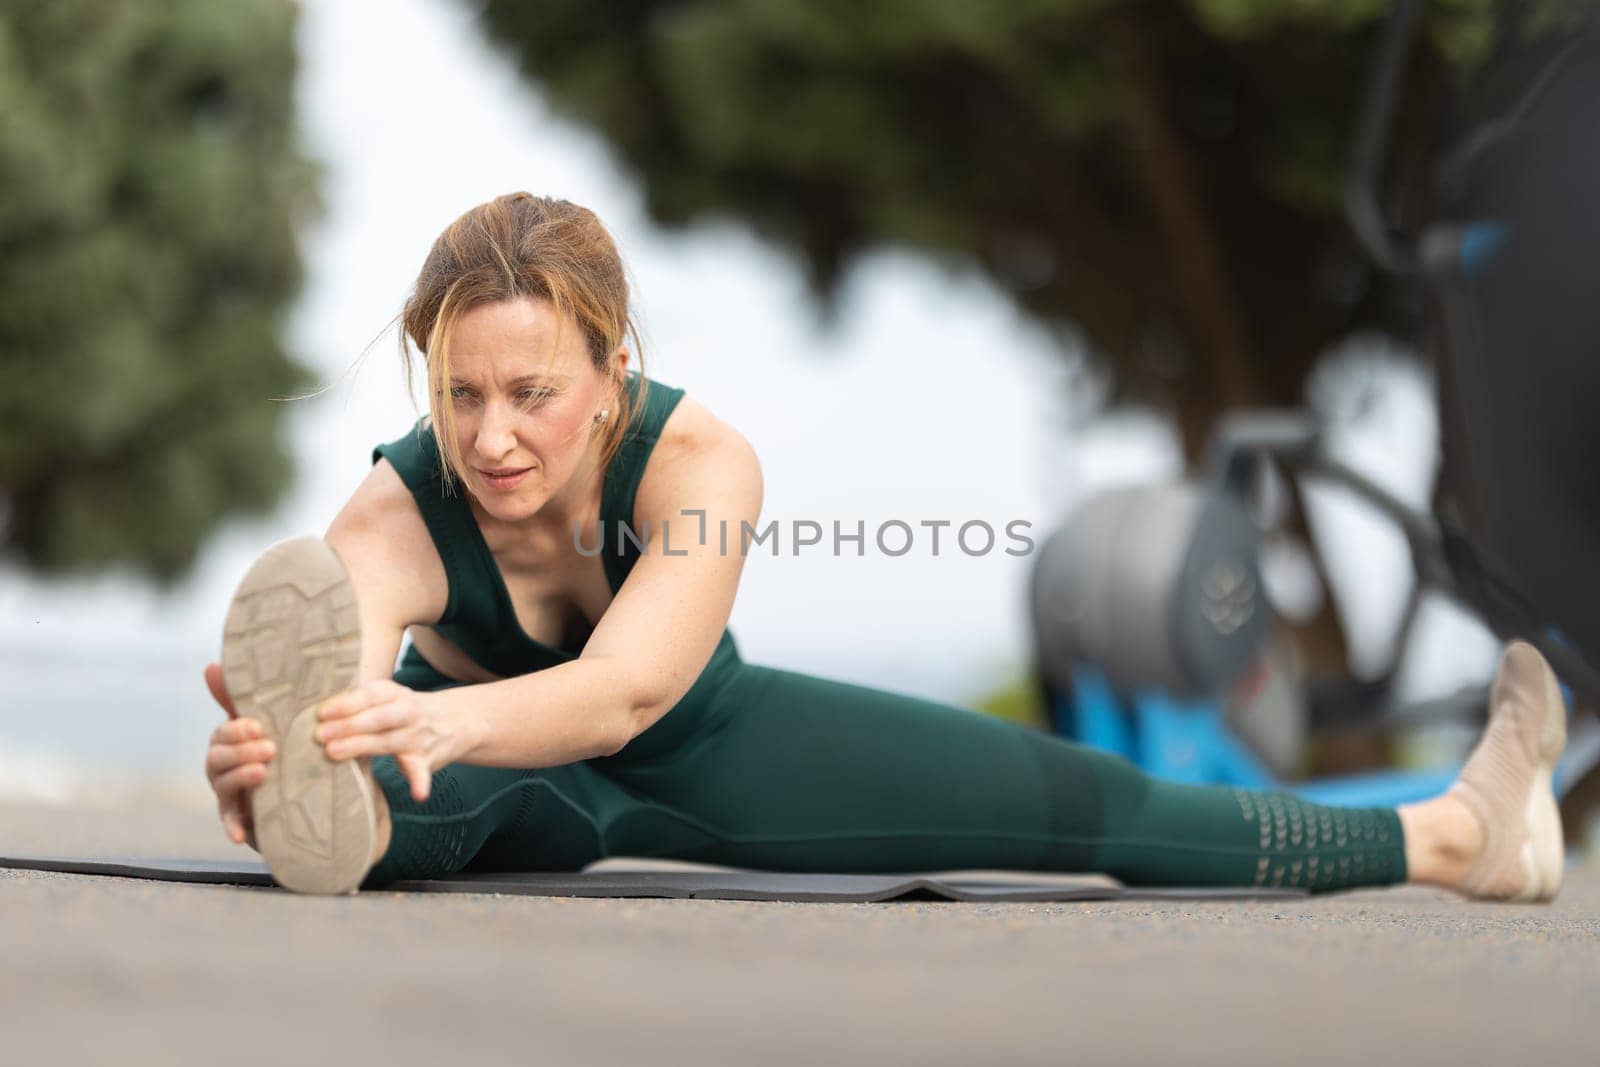 Adult sportive woman sitting in a splits at the outdoor sports ground and stretching to the side. Mid shot